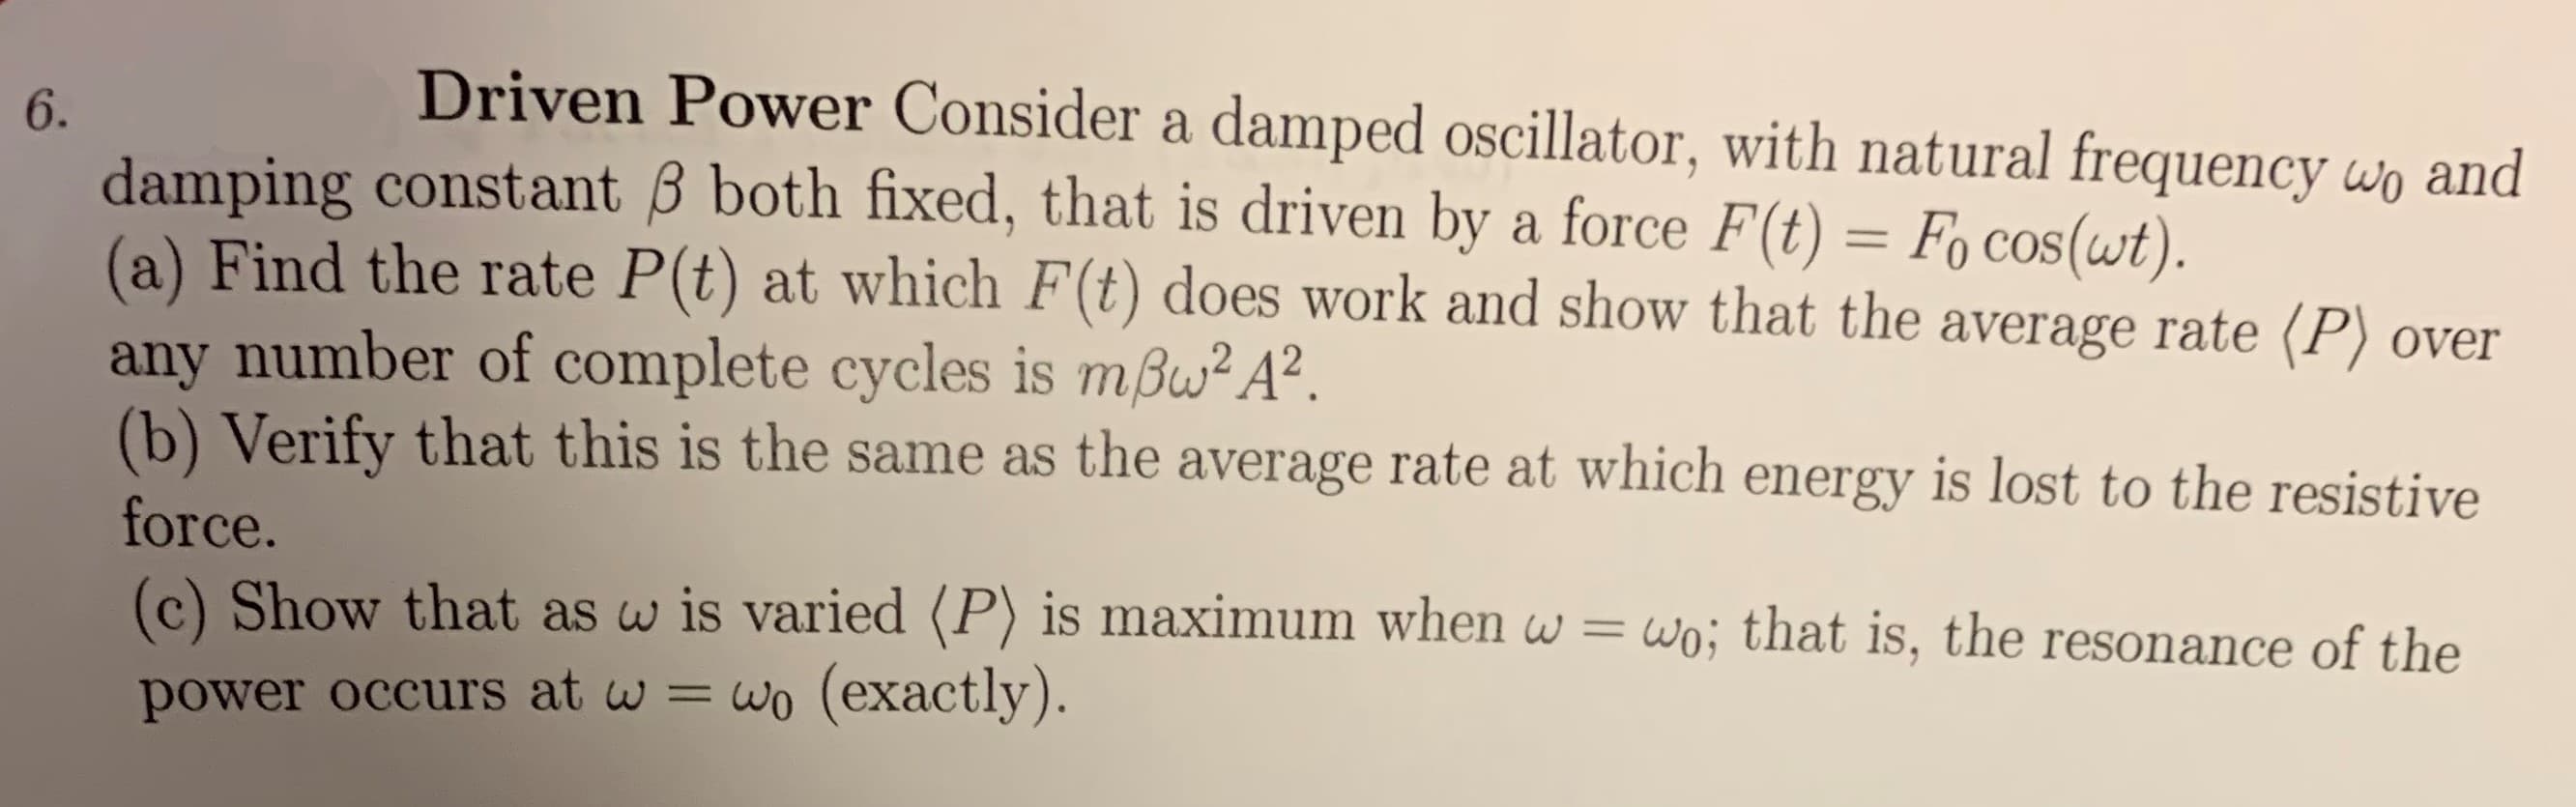 Driven Power Consider a damped oscillator, with natural frequency wo and
6.
damping constant B both fixed, that is driven by a force F(t) = Fo Cos(wt).
(a) Find the rate P(t) at which F(t) does work and show that the average rate (P) over
any number of complete cycles is mBw2 A2.
(b) Verify that this is the same as the average rate at which energy is lost to the resistive
force.
(c) Show that as w is varied (P) is maximum when w = wo; that is, the resonance of the
power occurs at w = wo (exactly).
